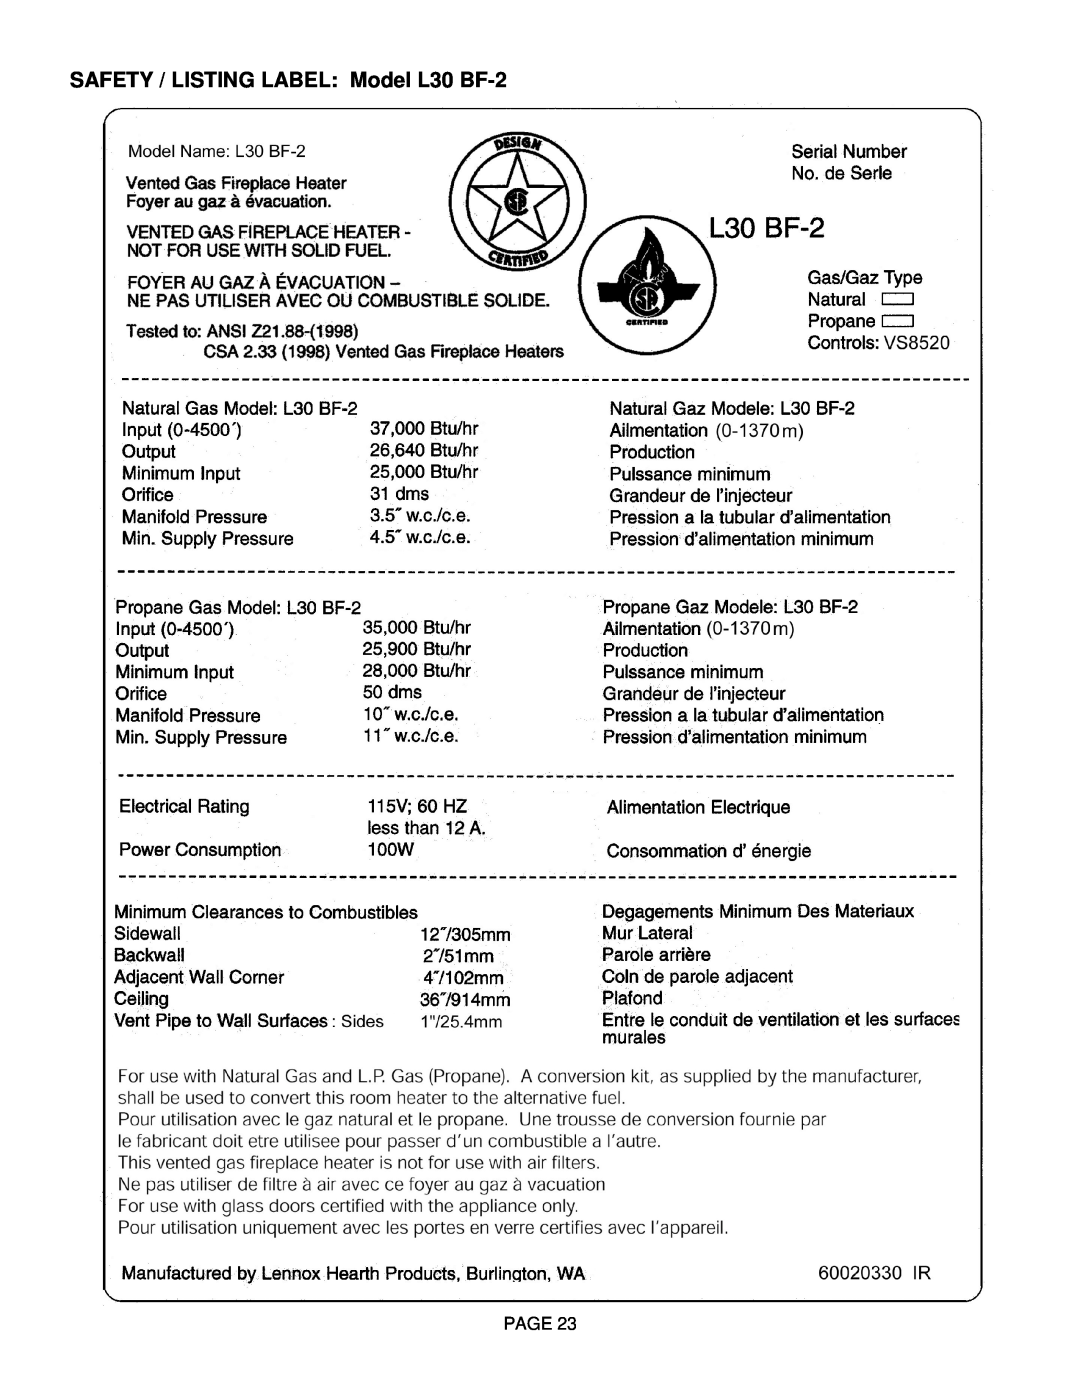 Lenoxx Electronics operation manual SAFETY / LISTING LABEL Model L30 BF-2, Page 